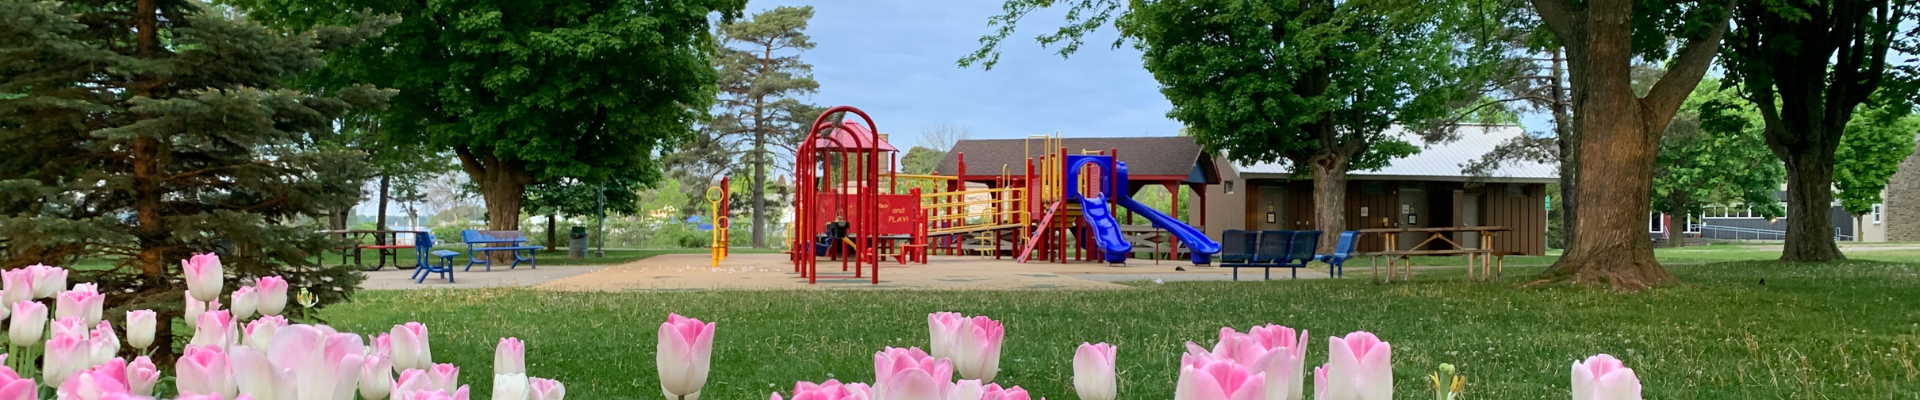 Accessible Play Structure at Hardy Park